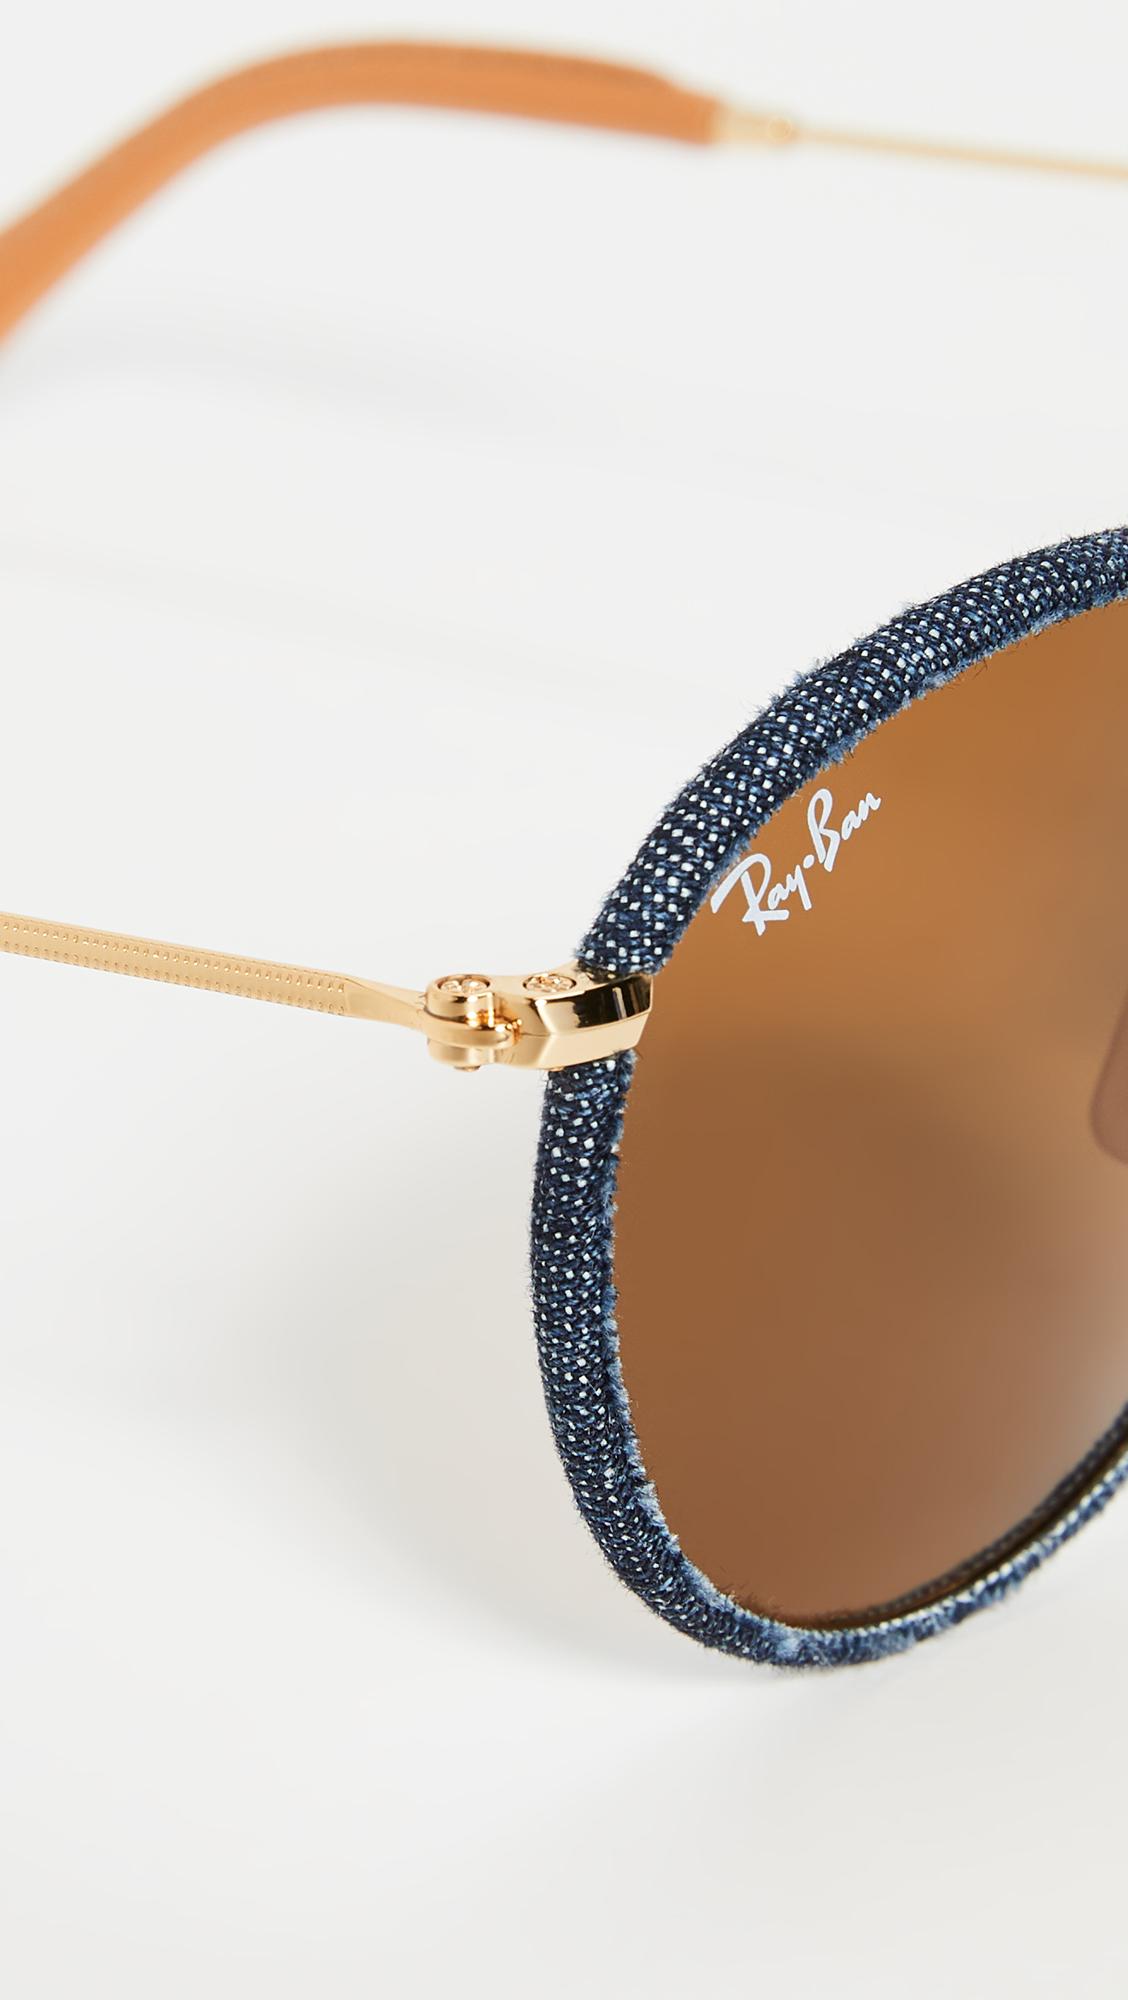 ray ban jeans sunglasses